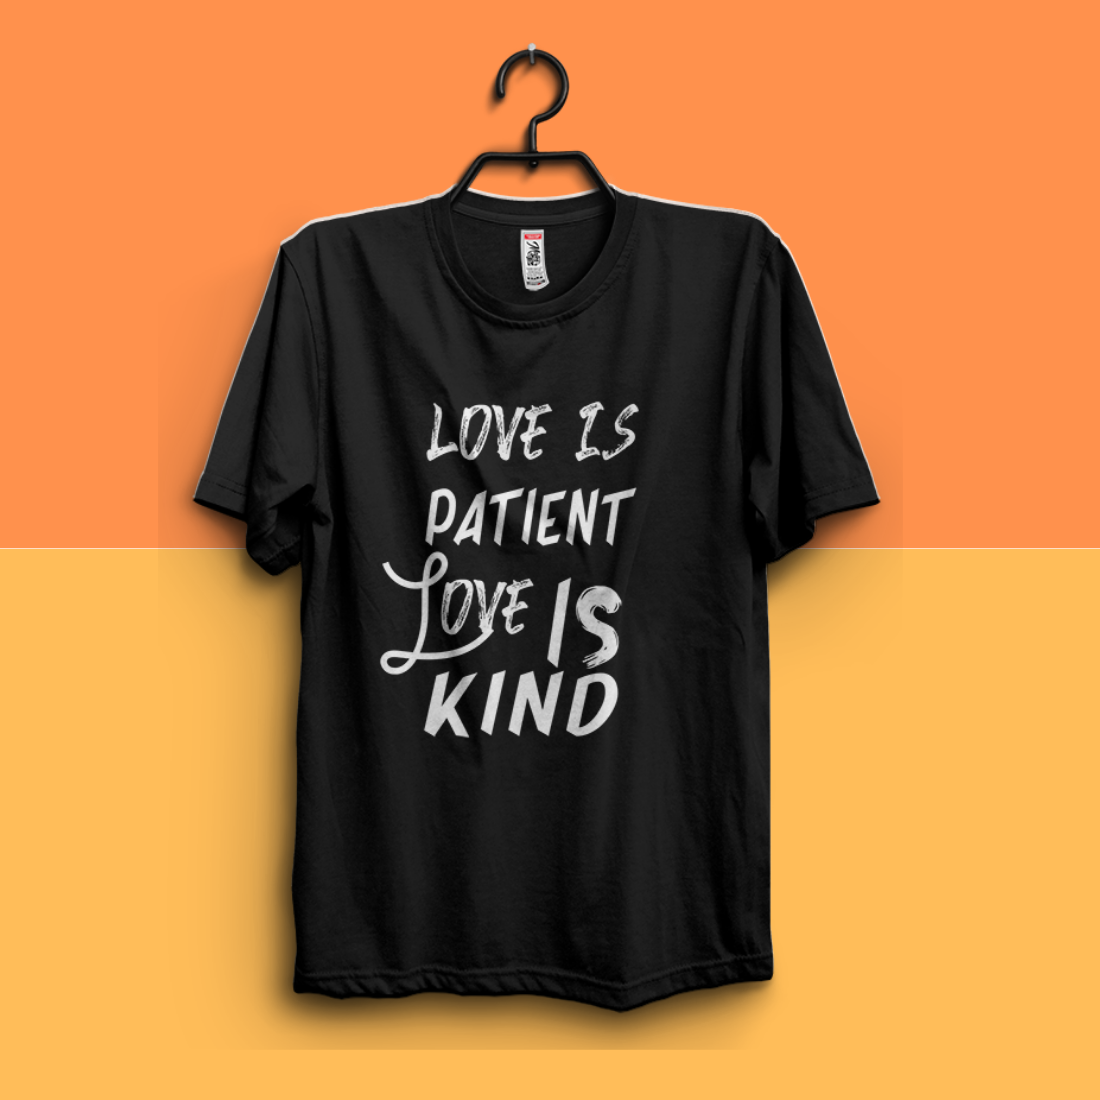 love is paitent love is kind preview image.